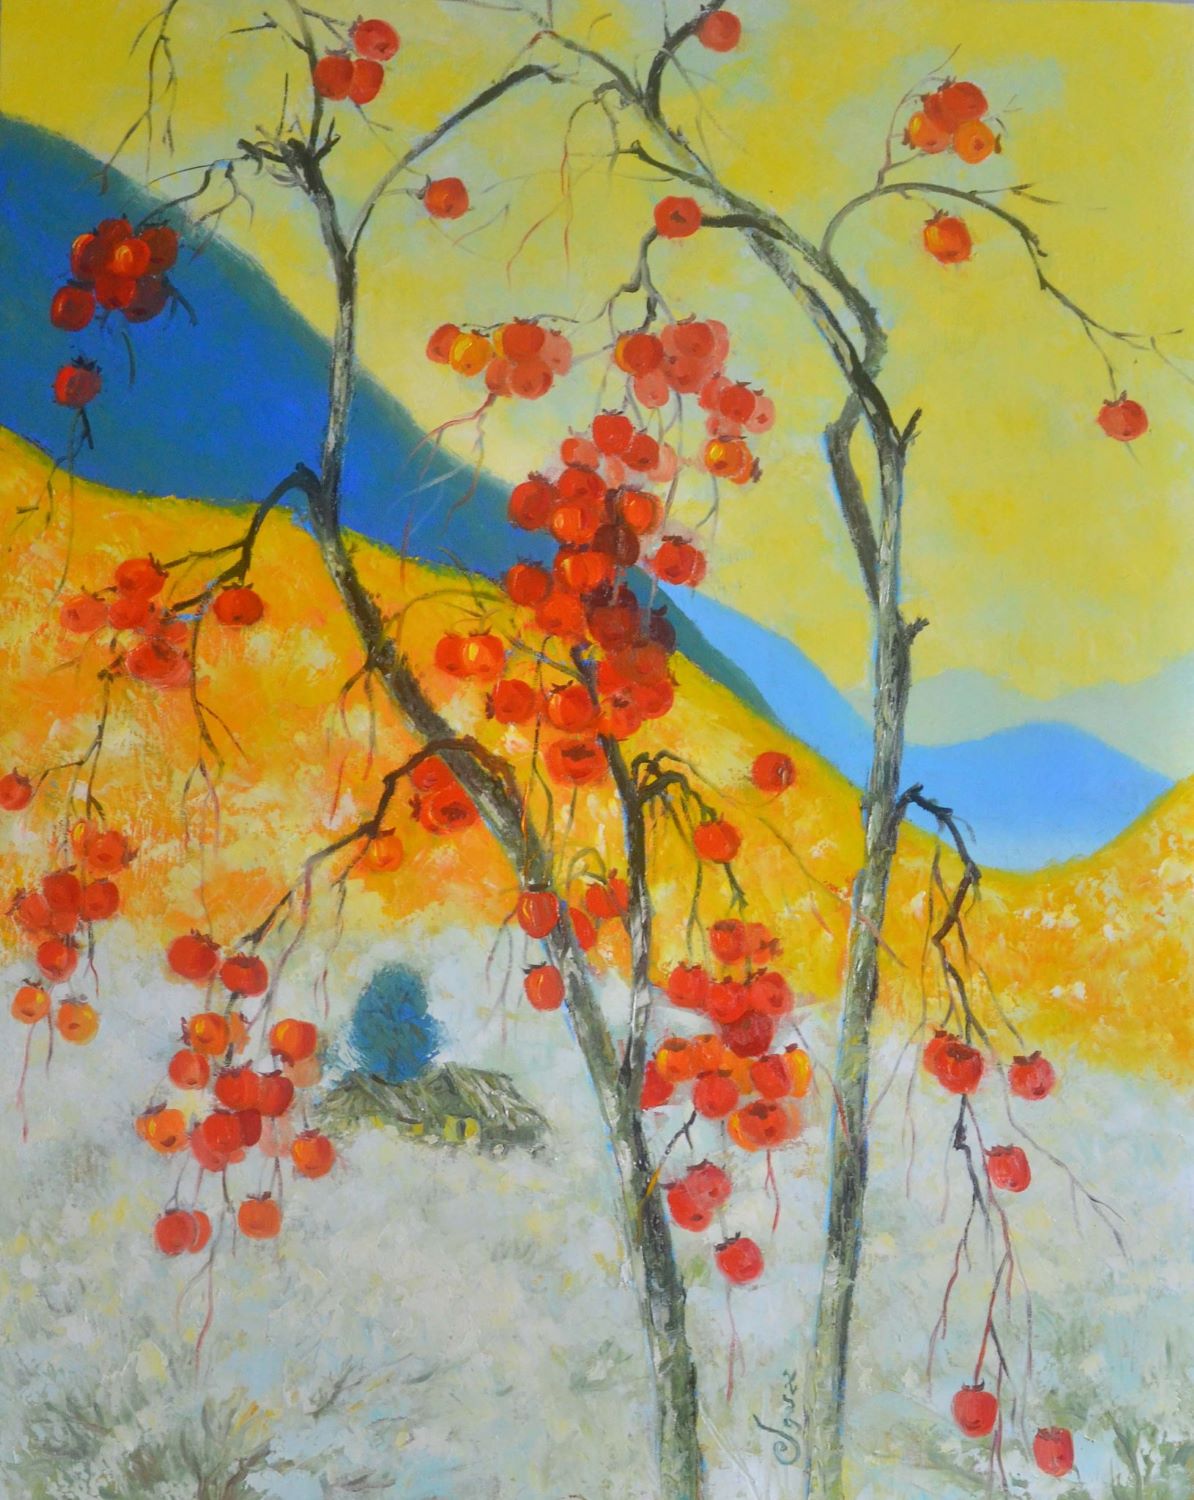 The Spring of Persimmons - Vietnamese Oil Painting by artist Dang Dinh Ngo